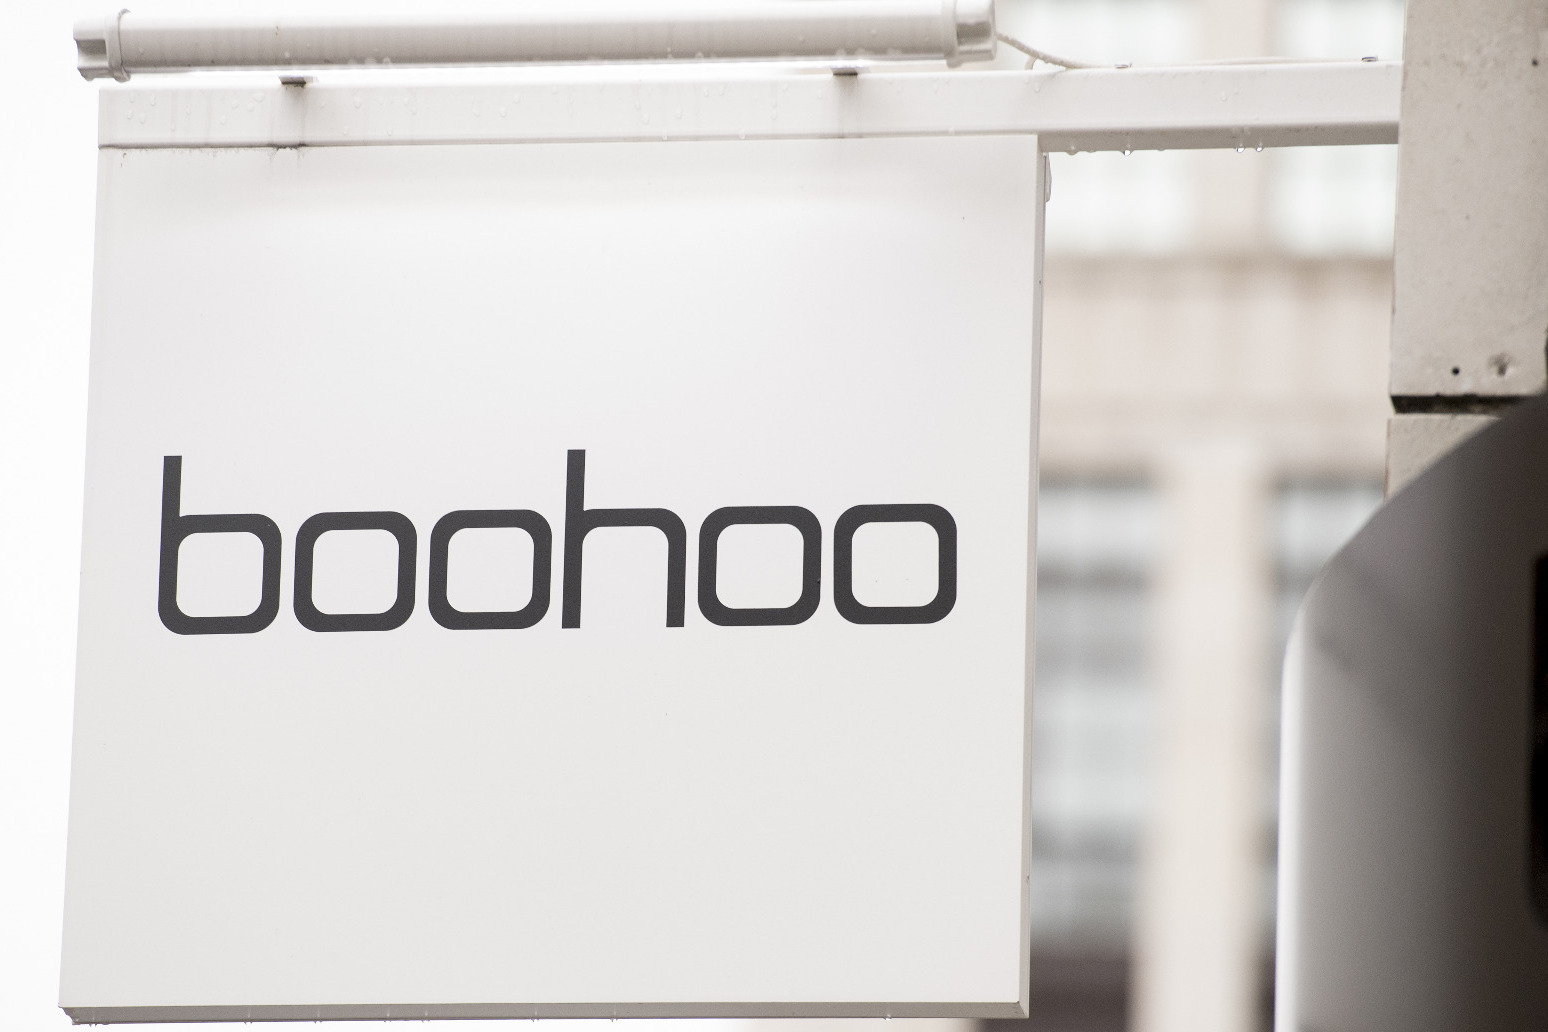 Boohoo slashes sales guidance and warns annual earnings could fall 